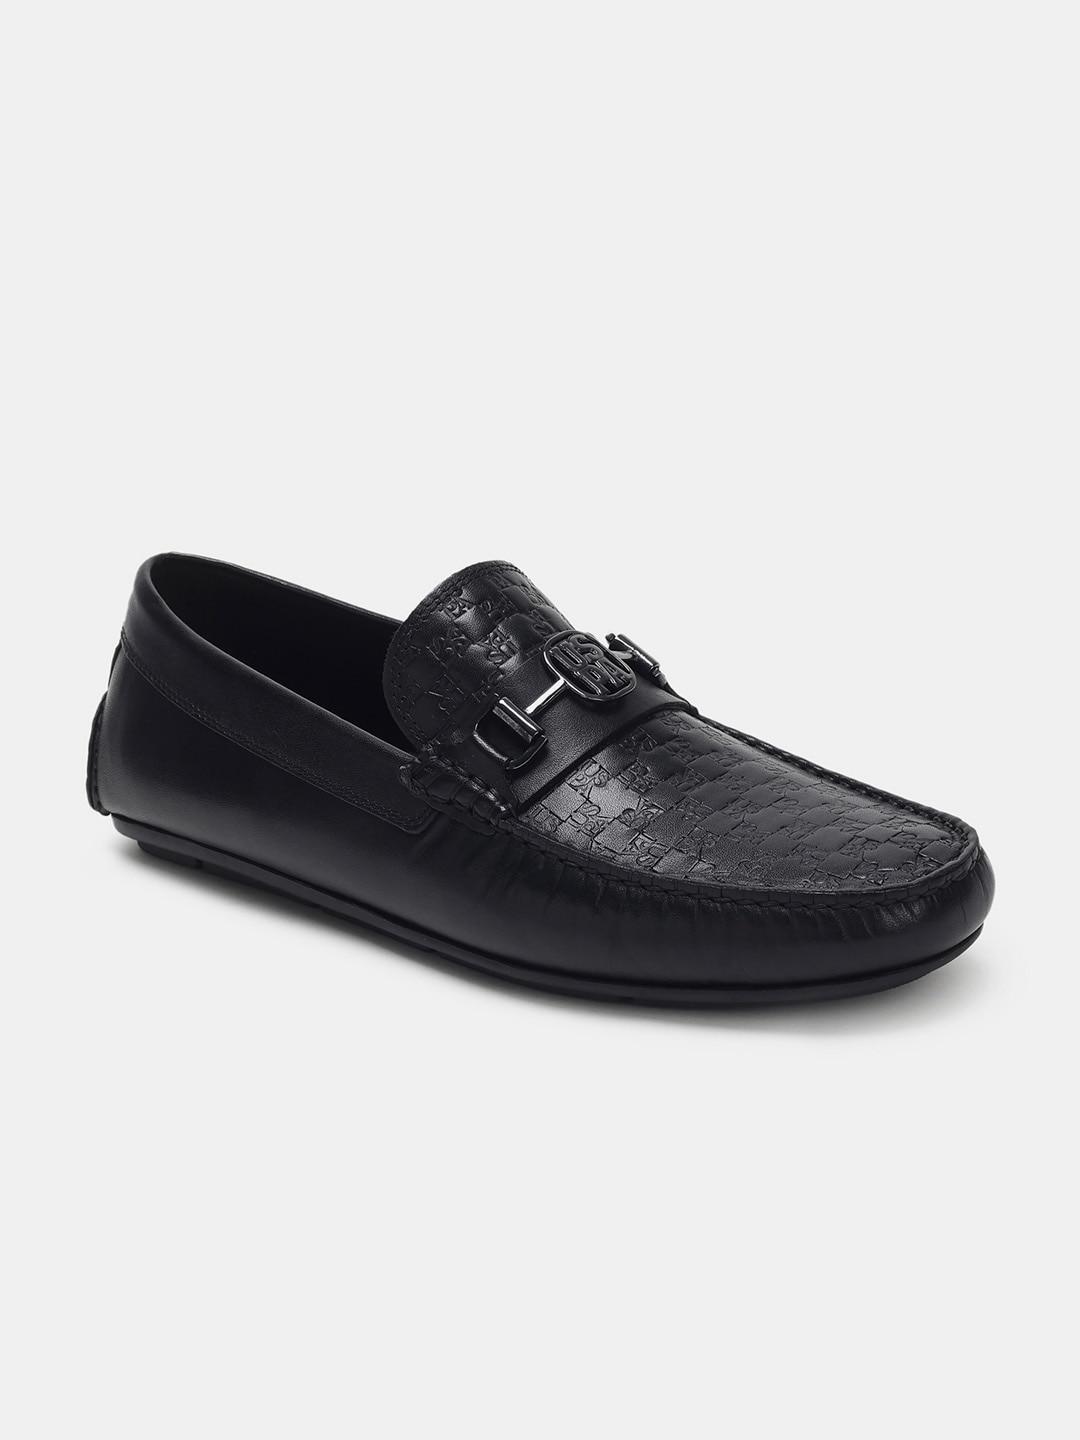 u-s-polo-assn-men-textured-leather-loafers